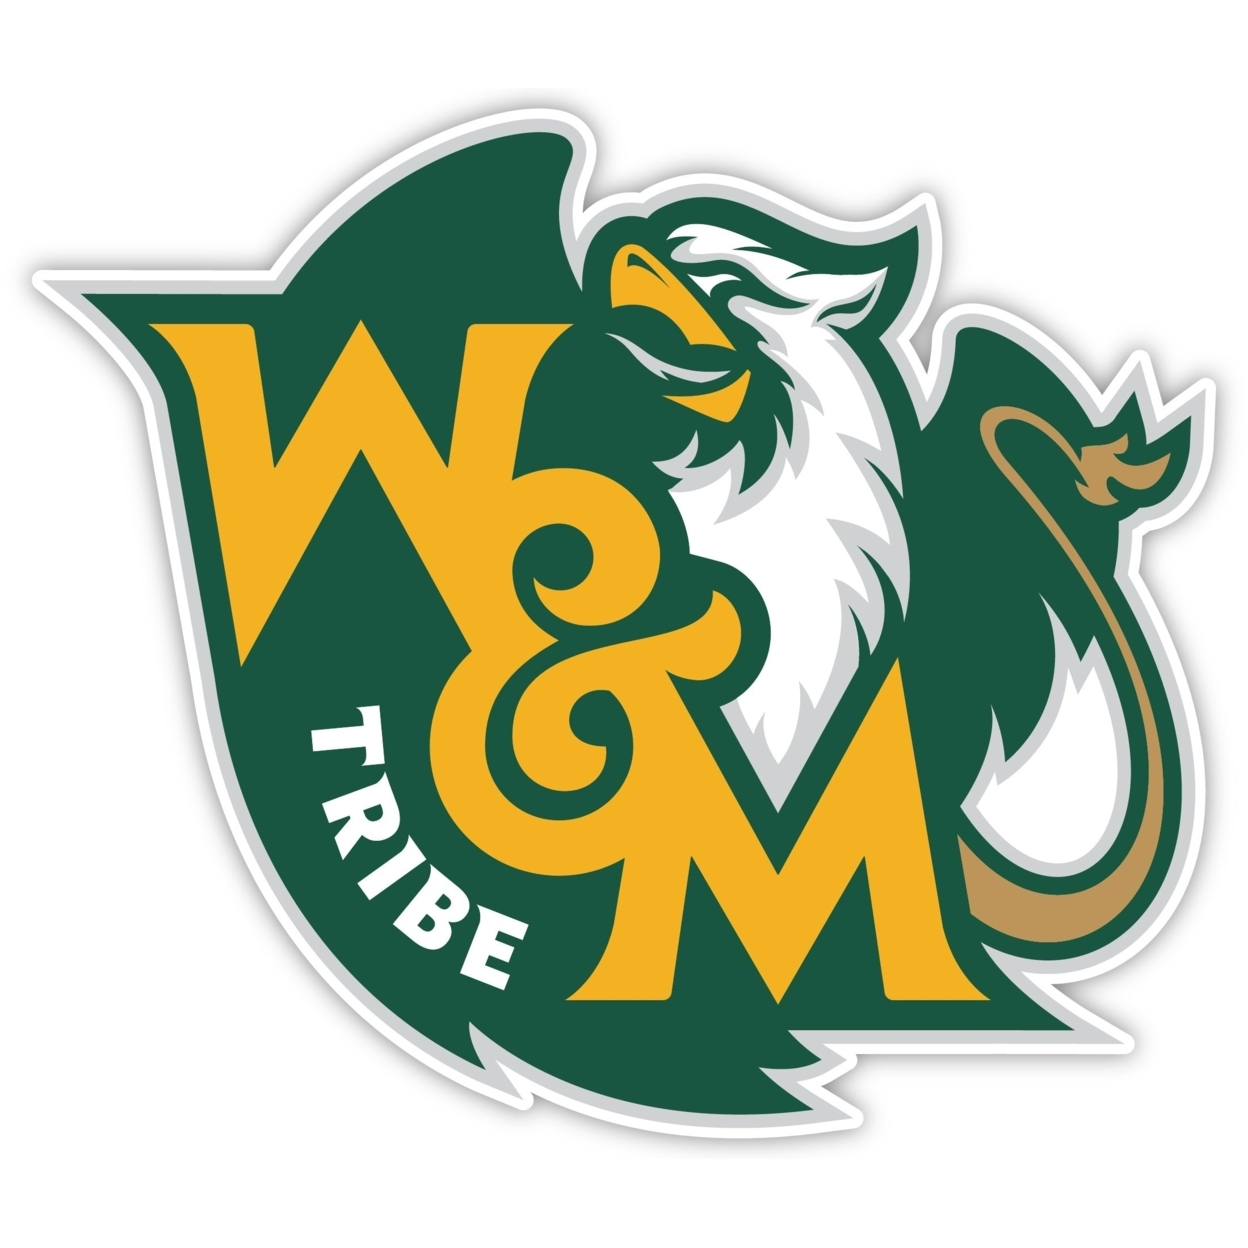 William And Mary 6 Inch Vinyl Mascot Decal Sticker - 1, 10-Inch